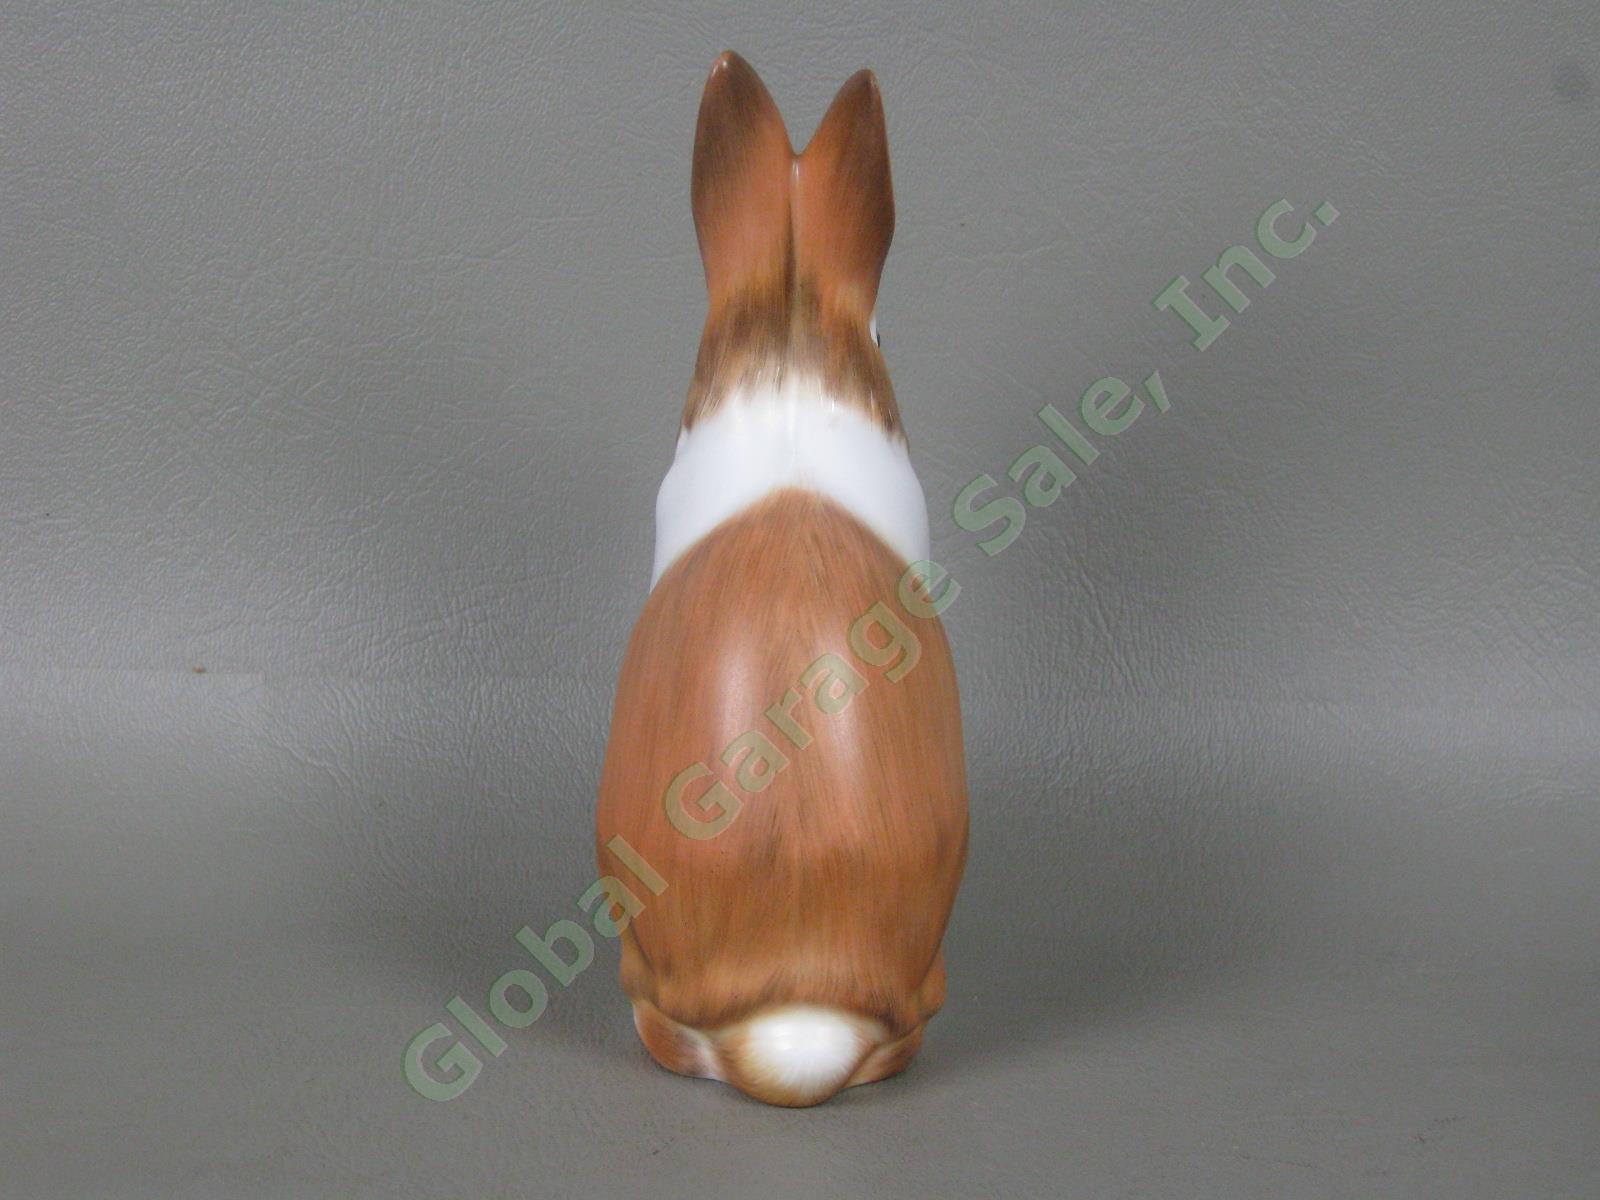 Herend Brown & White Handpainted 5.5" Porcelain Rabbit Figurine No Reserve Price 4